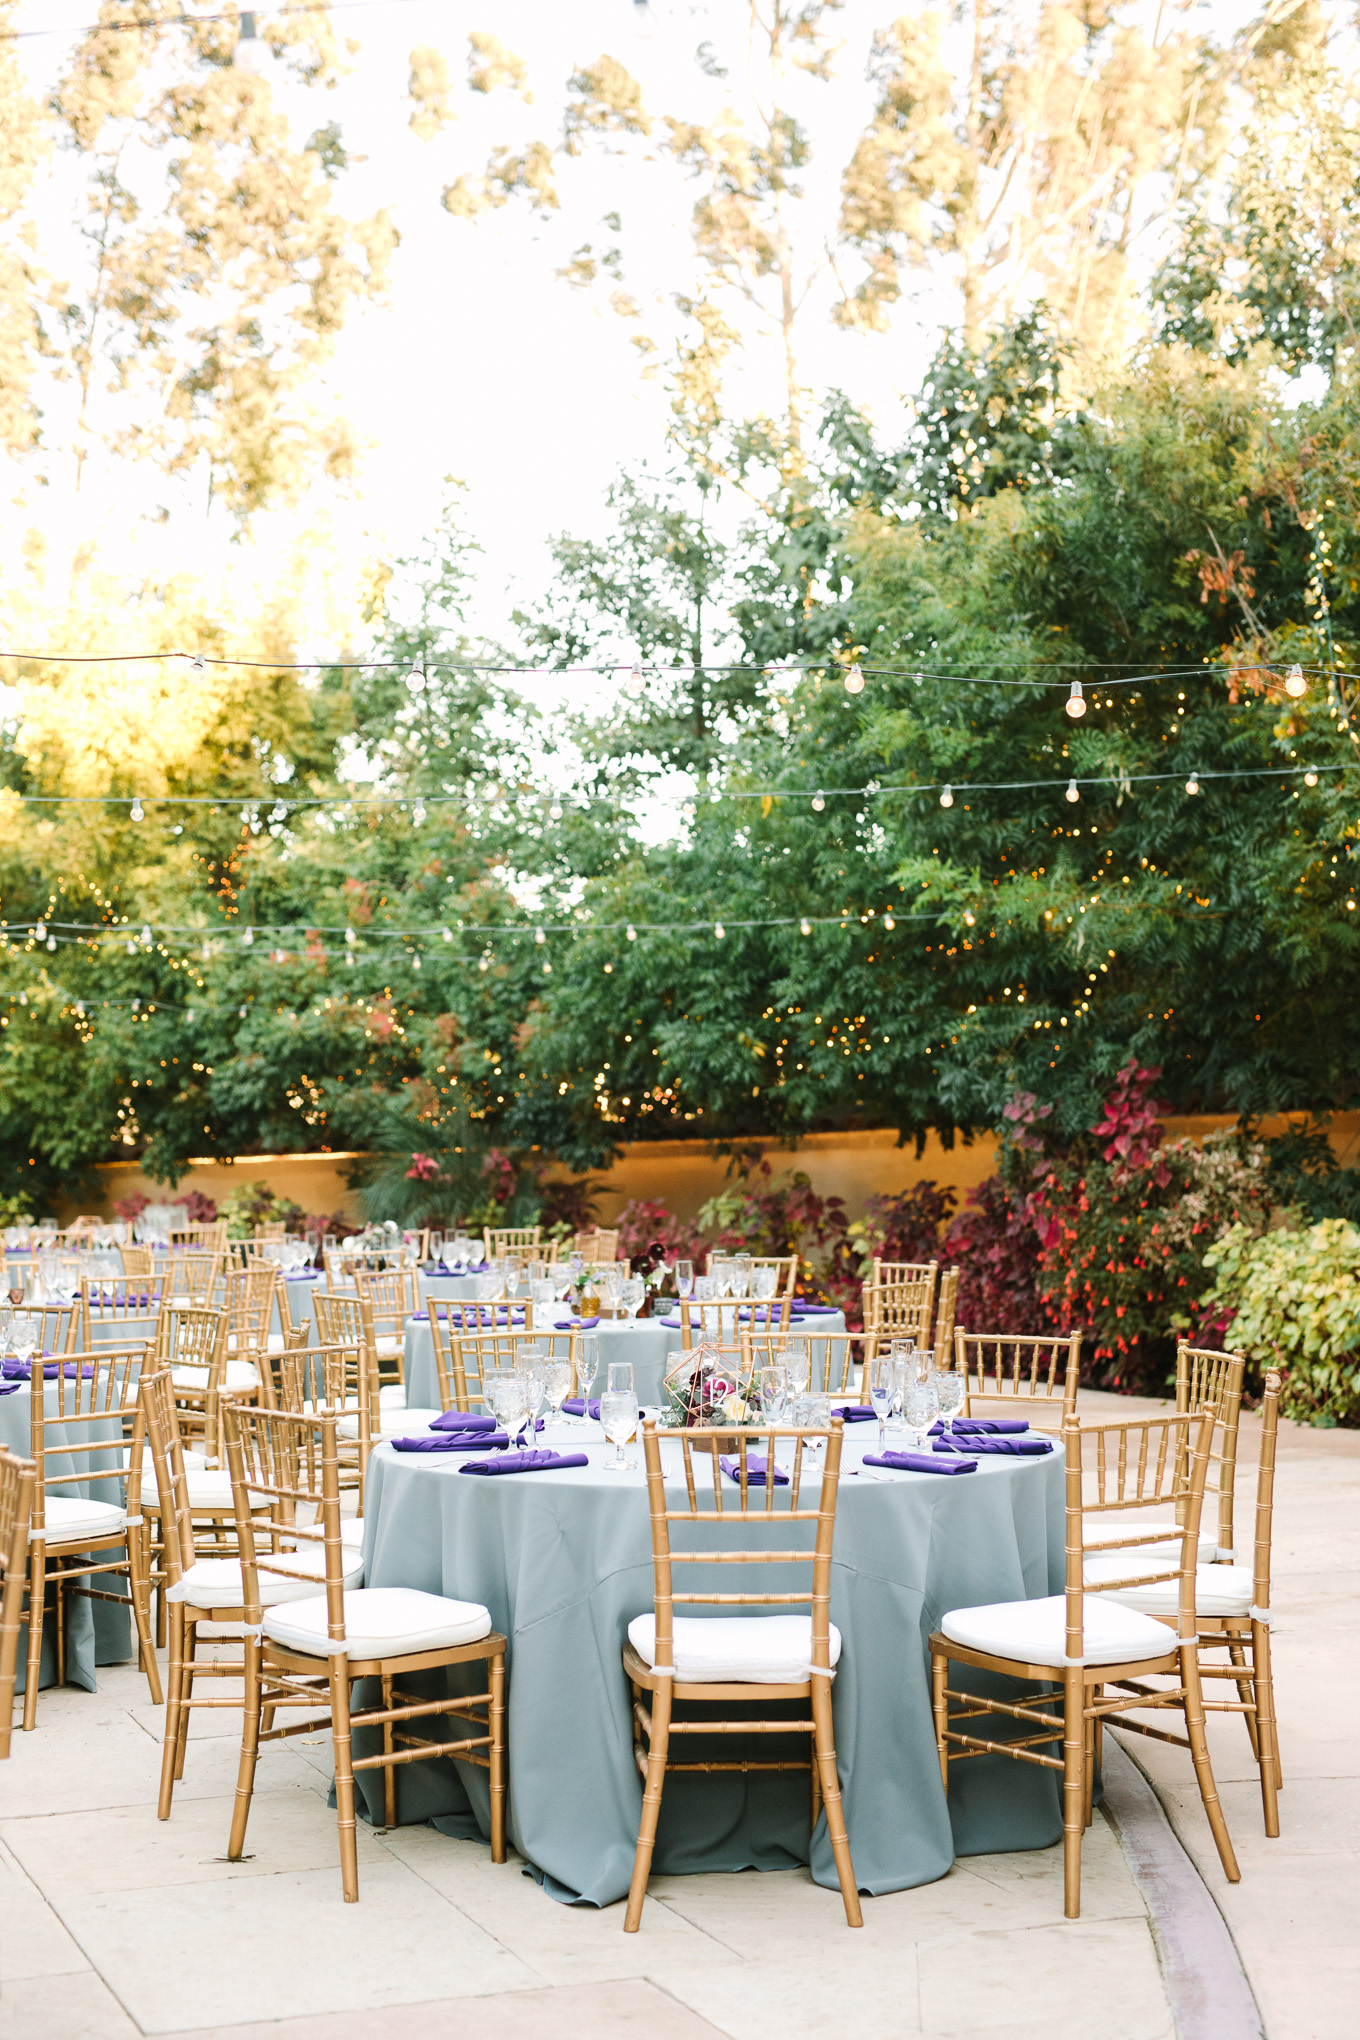 Eden Gardens wedding reception | Best Southern California Garden Wedding Venues | Colorful and elevated wedding photography for fun-loving couples | #gardenvenue #weddingvenue #socalweddingvenue #bouquetideas #uniquebouquet   Source: Mary Costa Photography | Los Angeles 